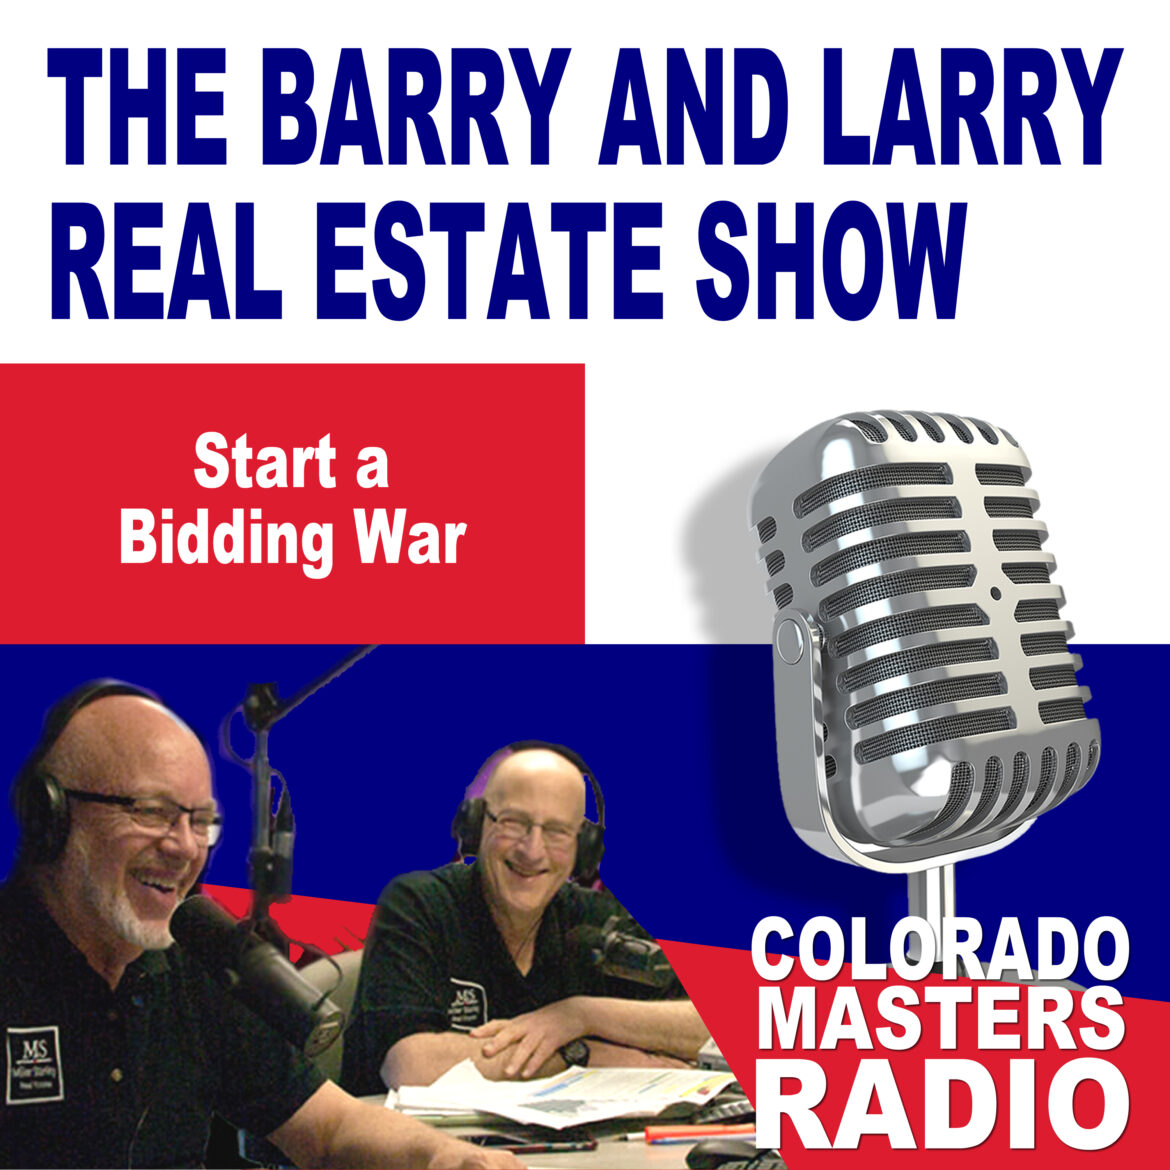 The Larry and Barry Real Estate Show - Start a Bidding War